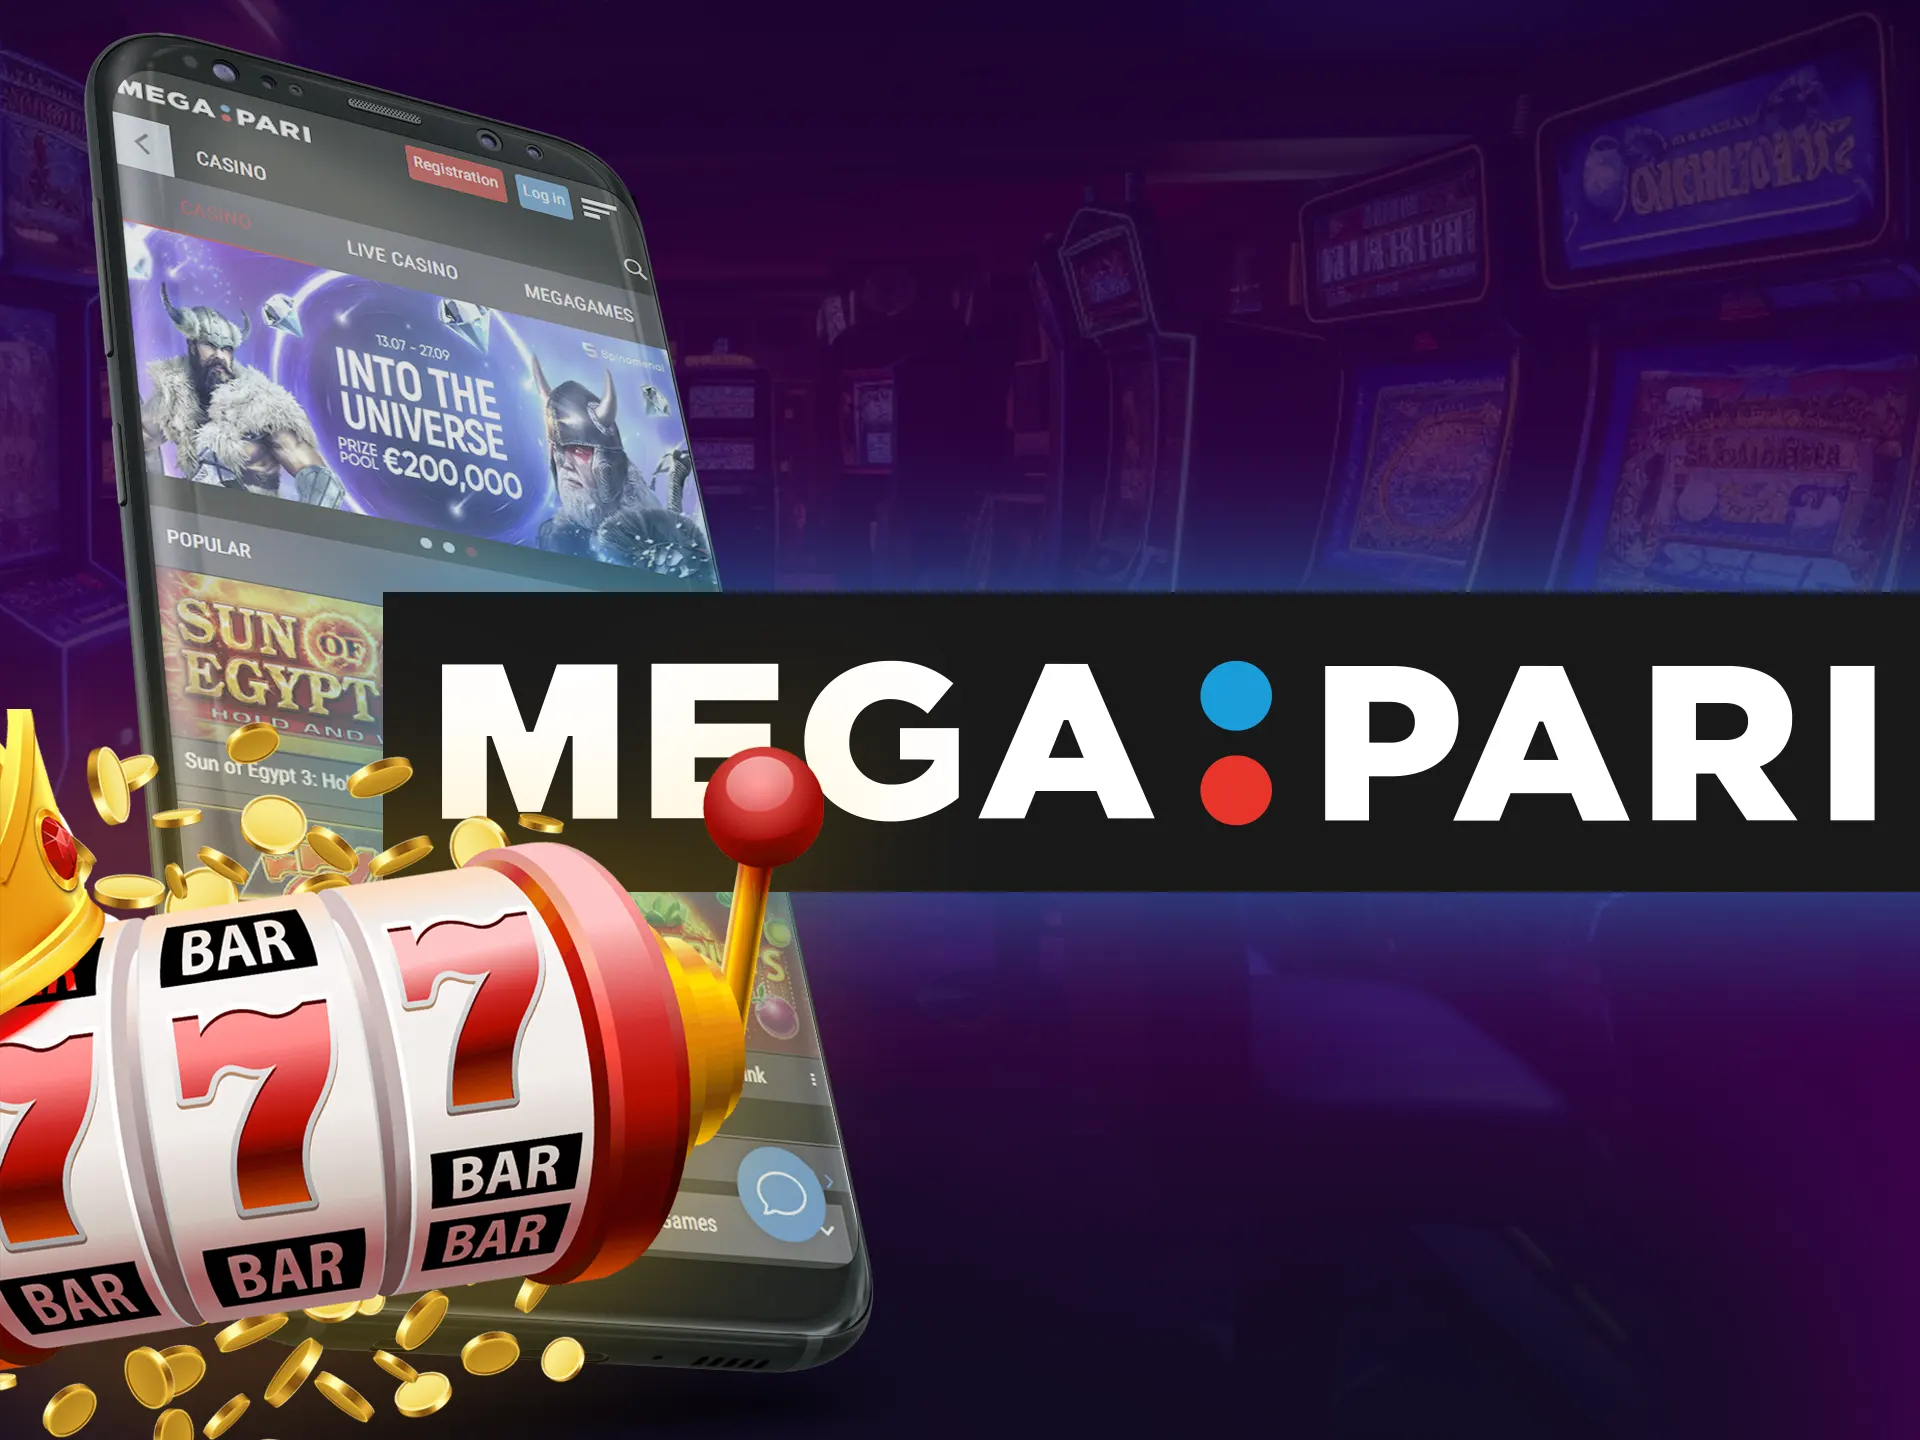 With Megapari app, choose any slots to play at the casino.